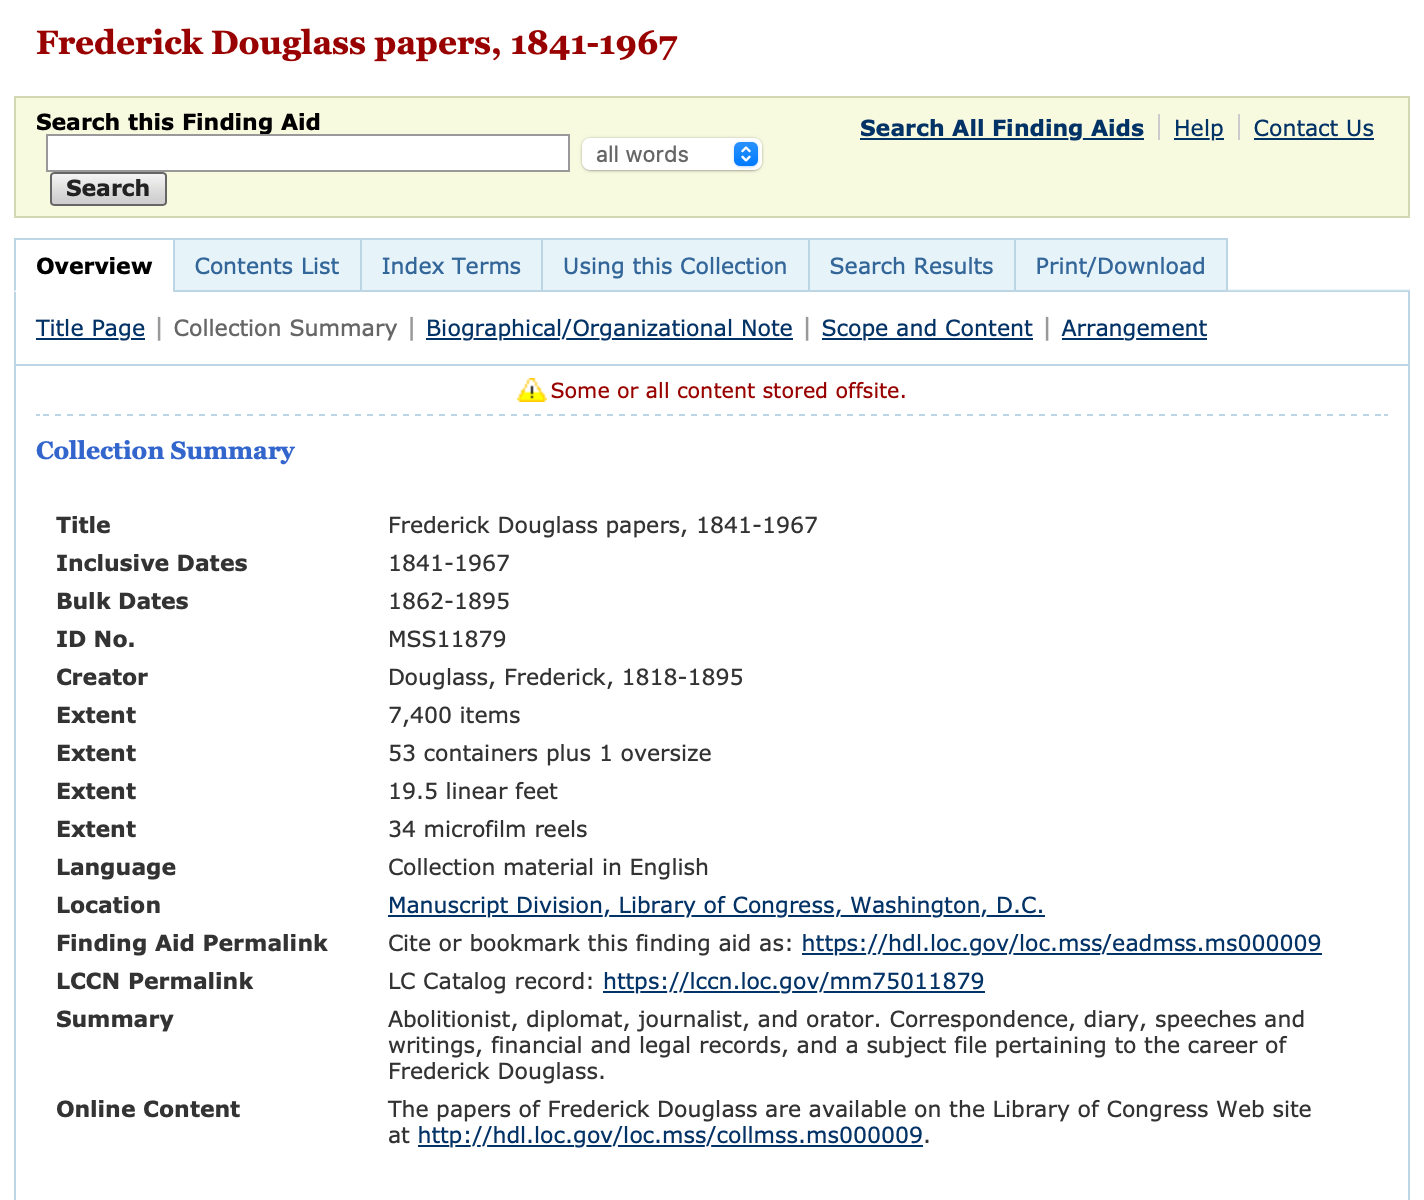 An image of the Frederick Douglass Papers' finding aid overview page. 